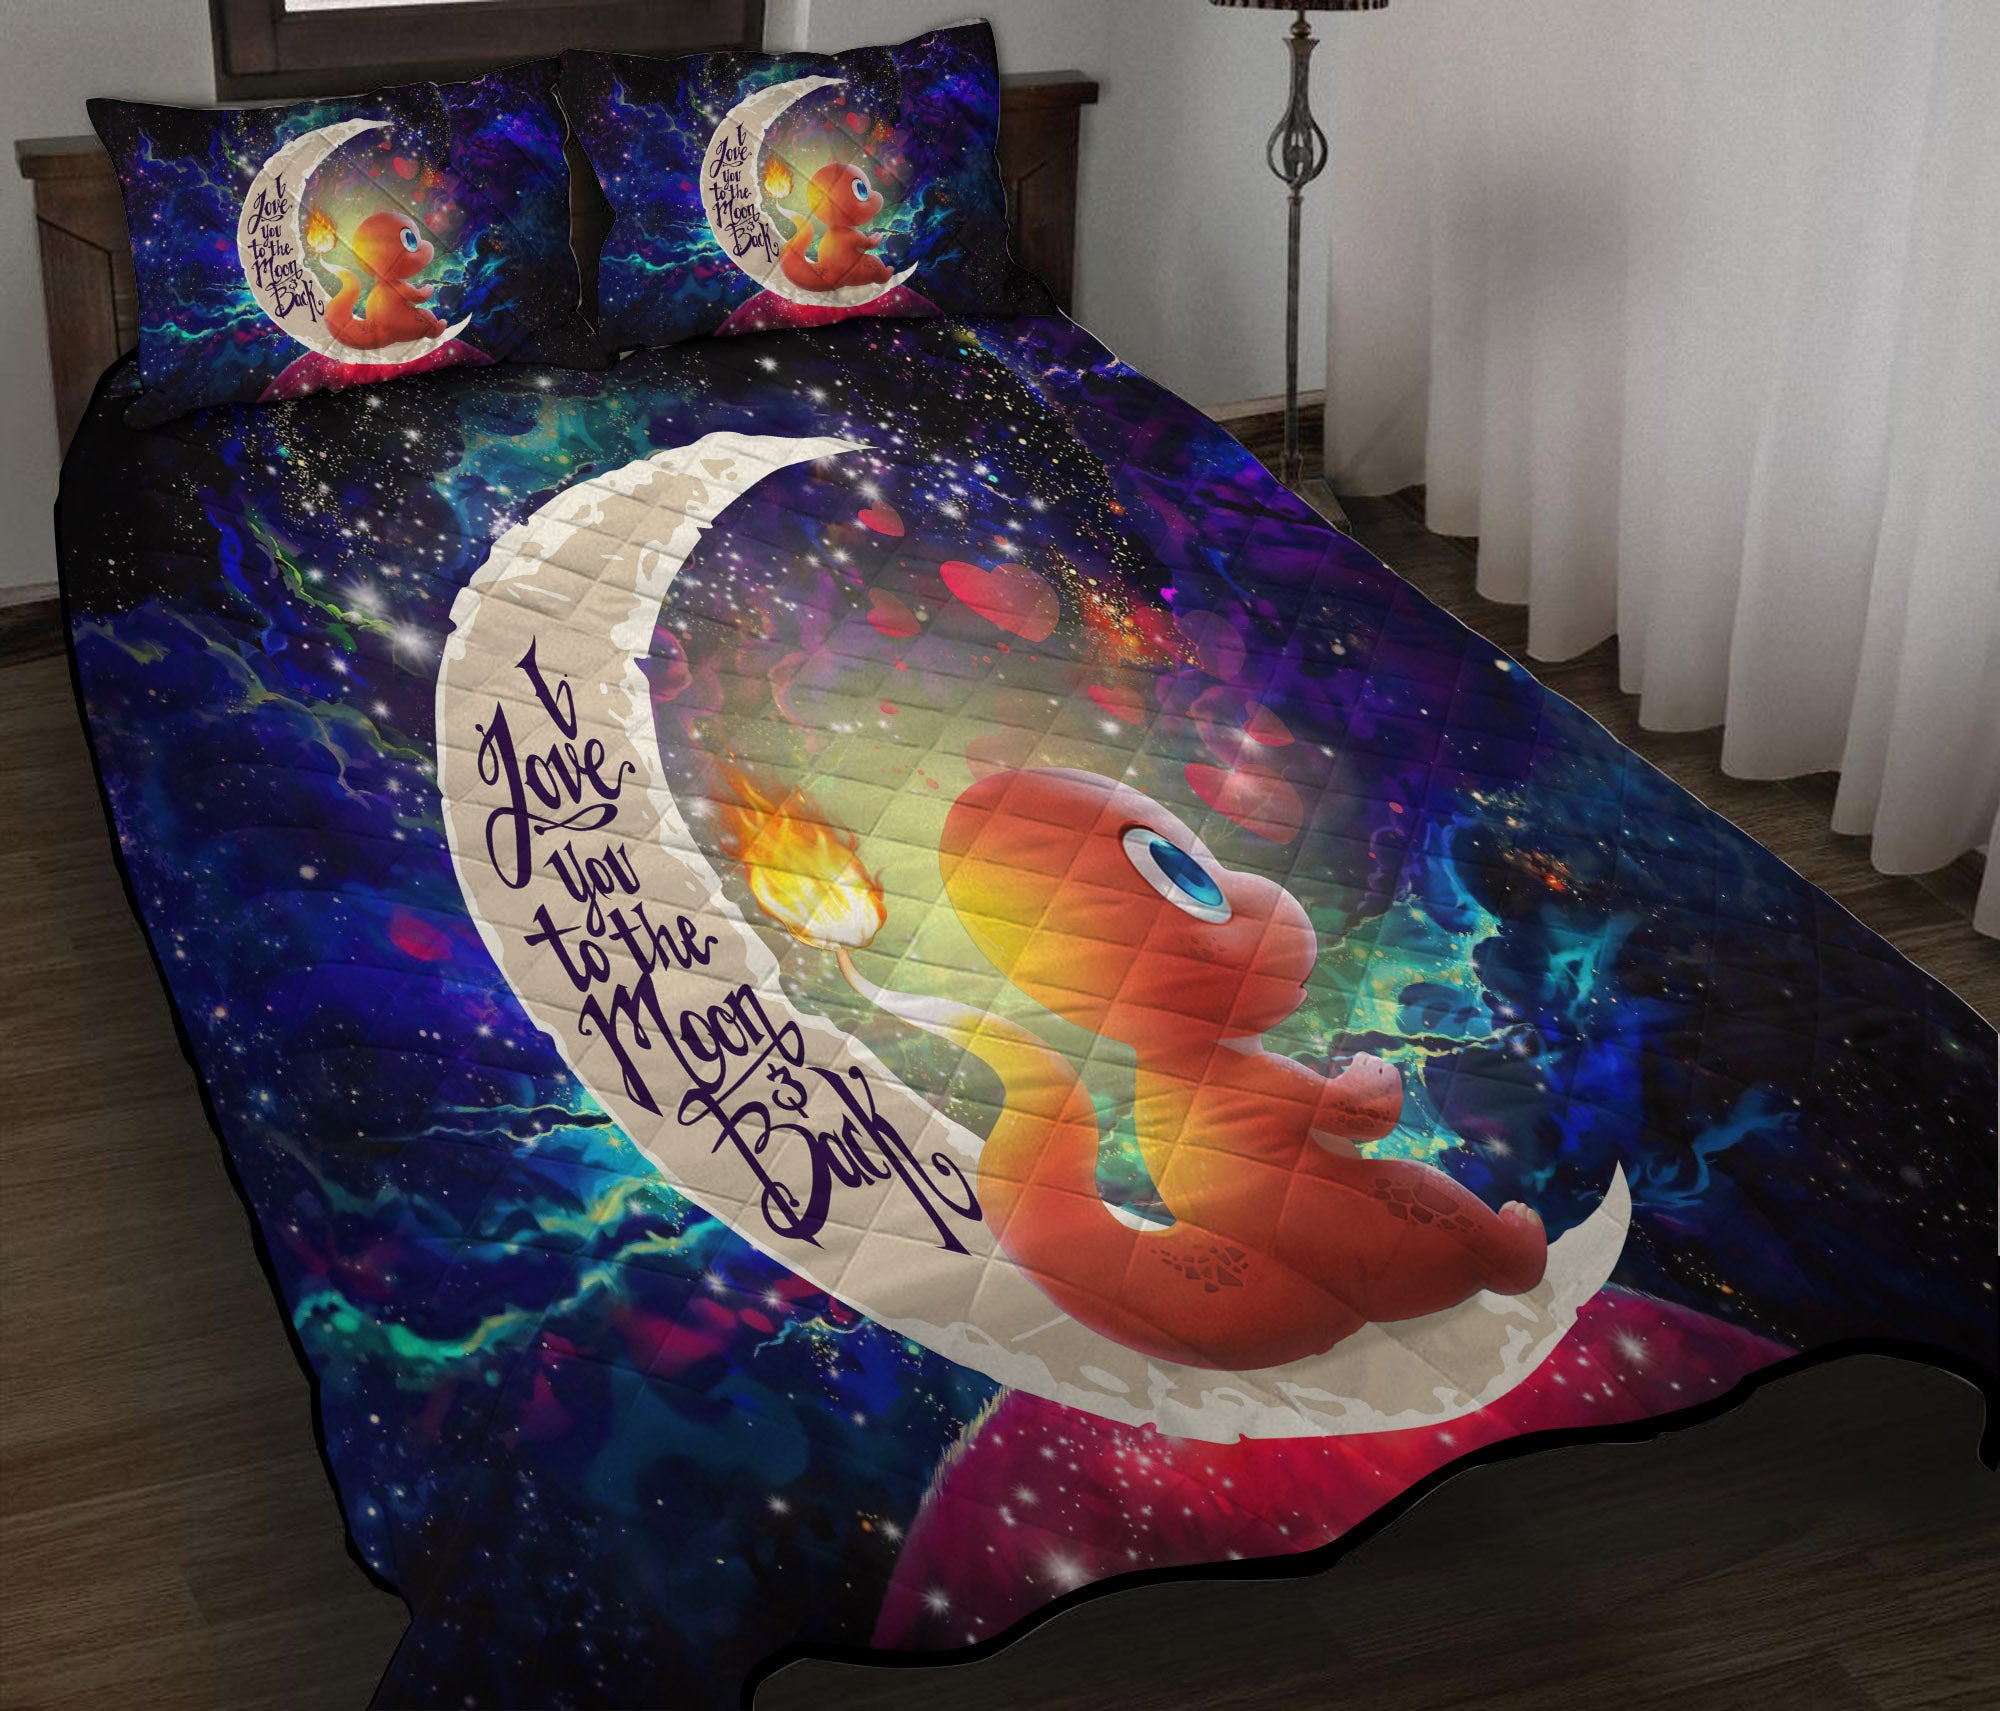 Cute Charmander Pokemon Love You To The Moon Galaxy Quilt Bed Sets Nearkii